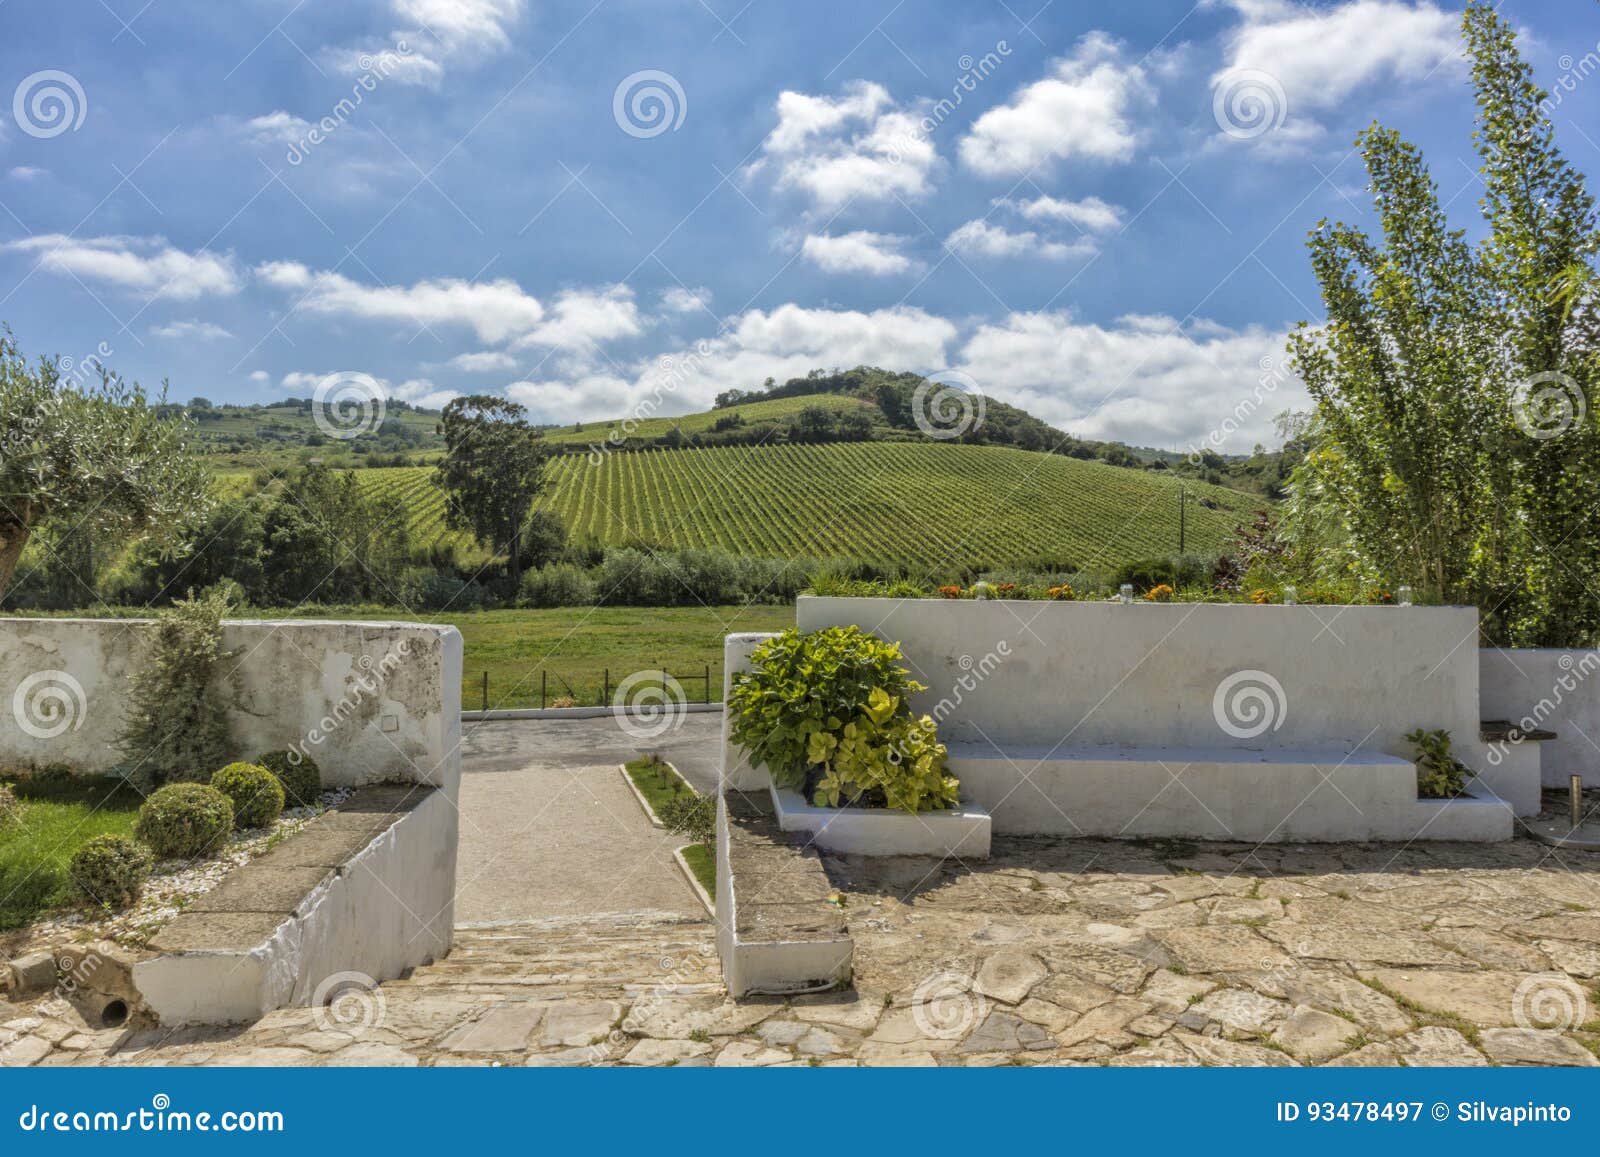 entrance of homestead with stairs, wall and mountainous field in